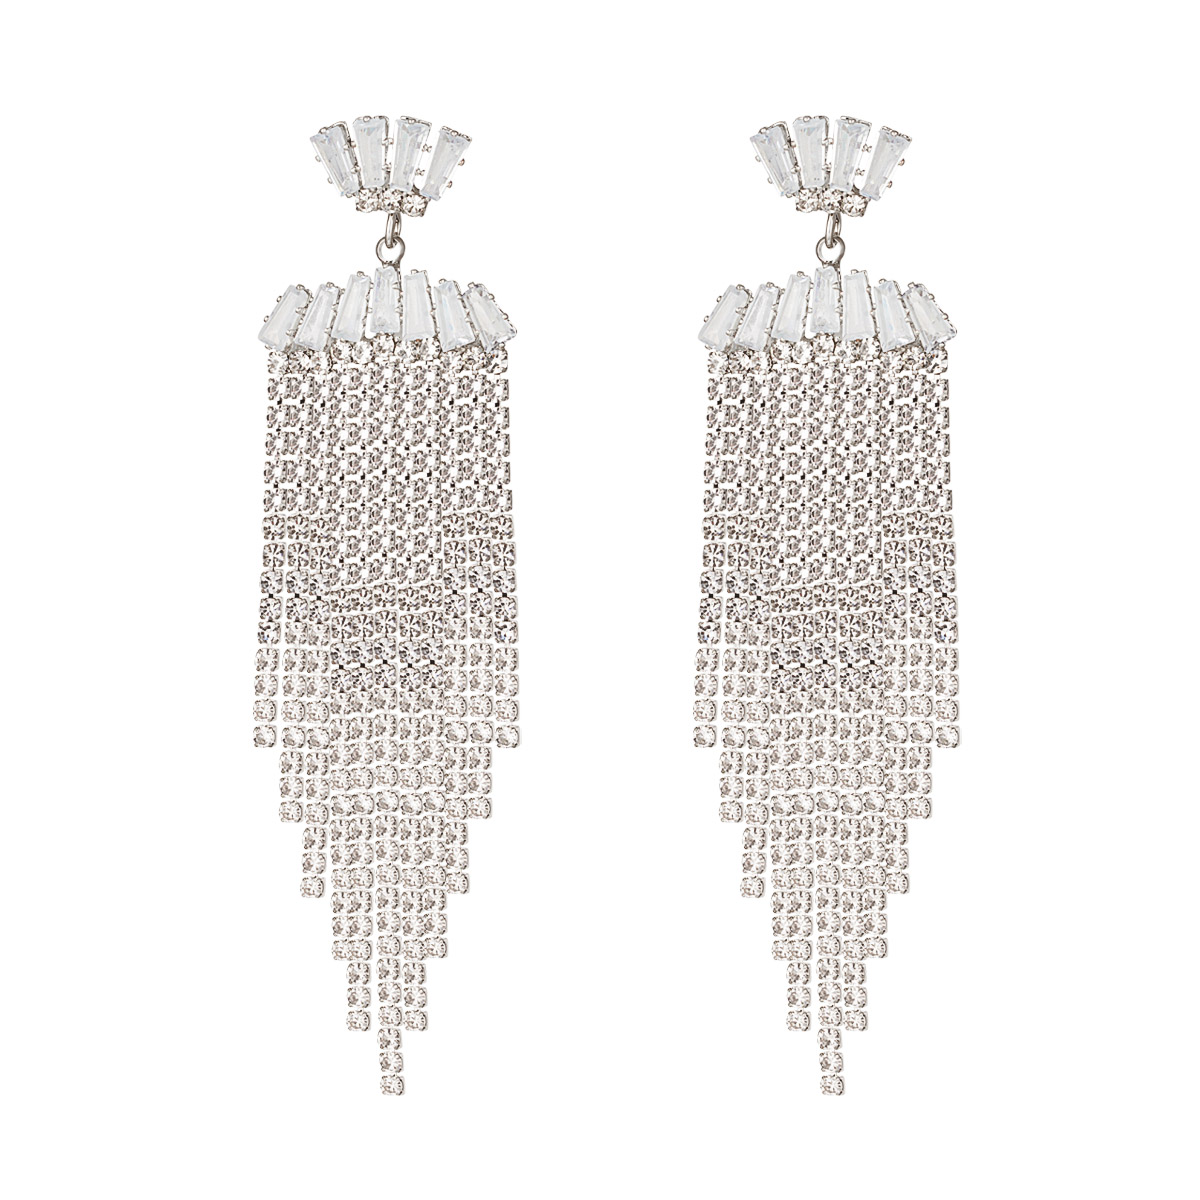 Rhinestone earrings with details - Holiday Essentials